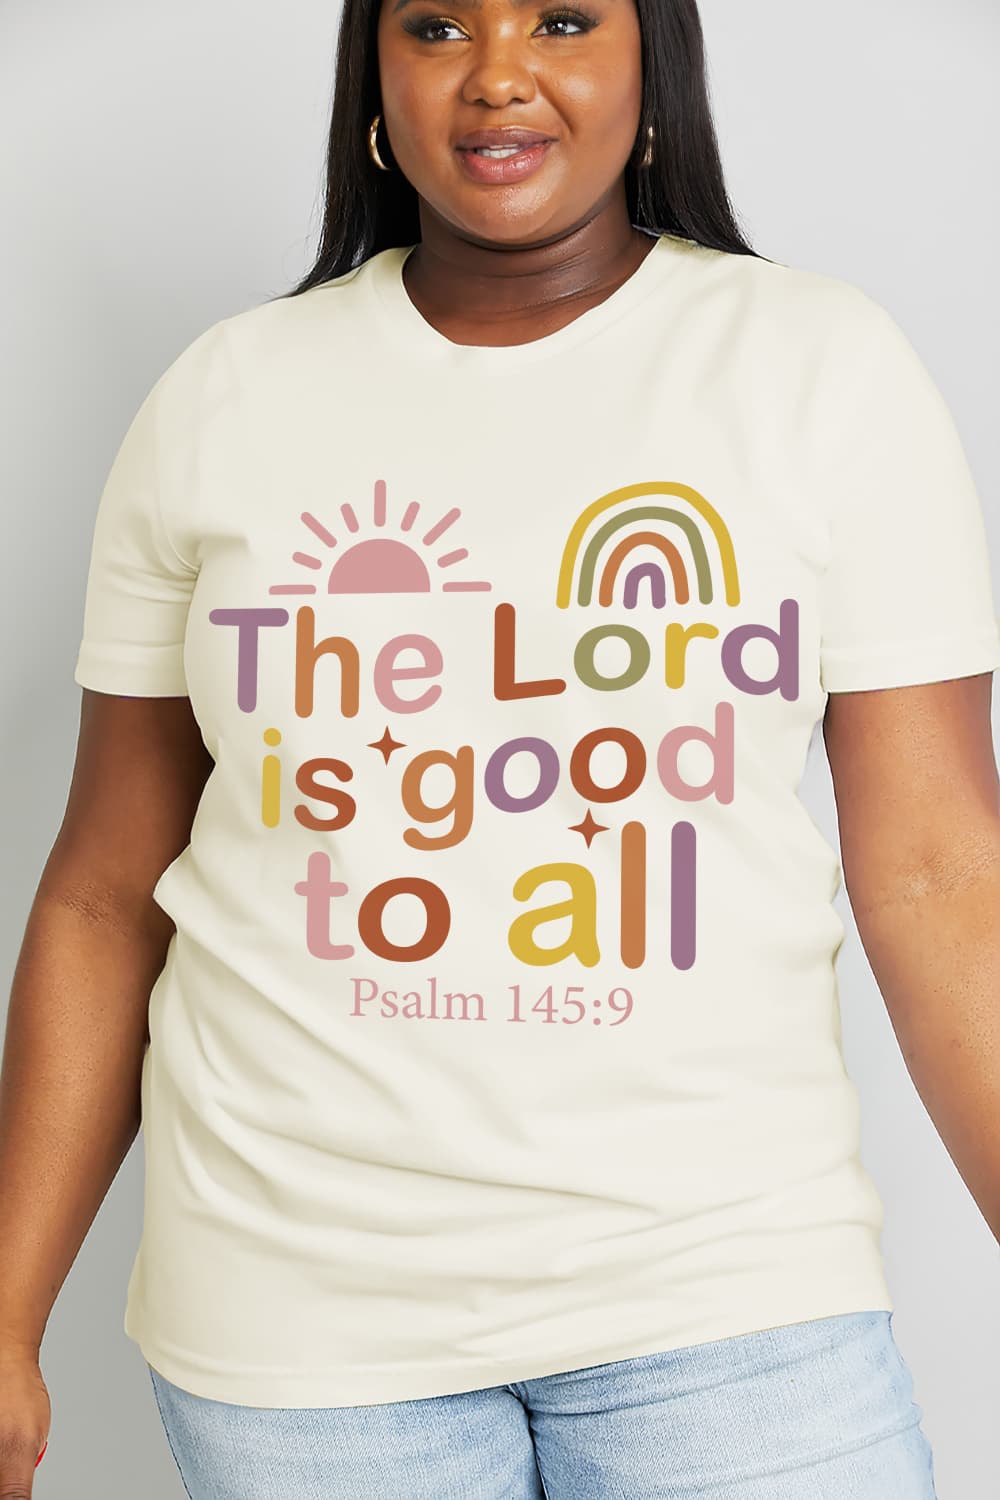 THE LORD IS GOOD TO ALL PSALM 145:9 Graphic Cotton Tee - Mythical Kitty Boutique